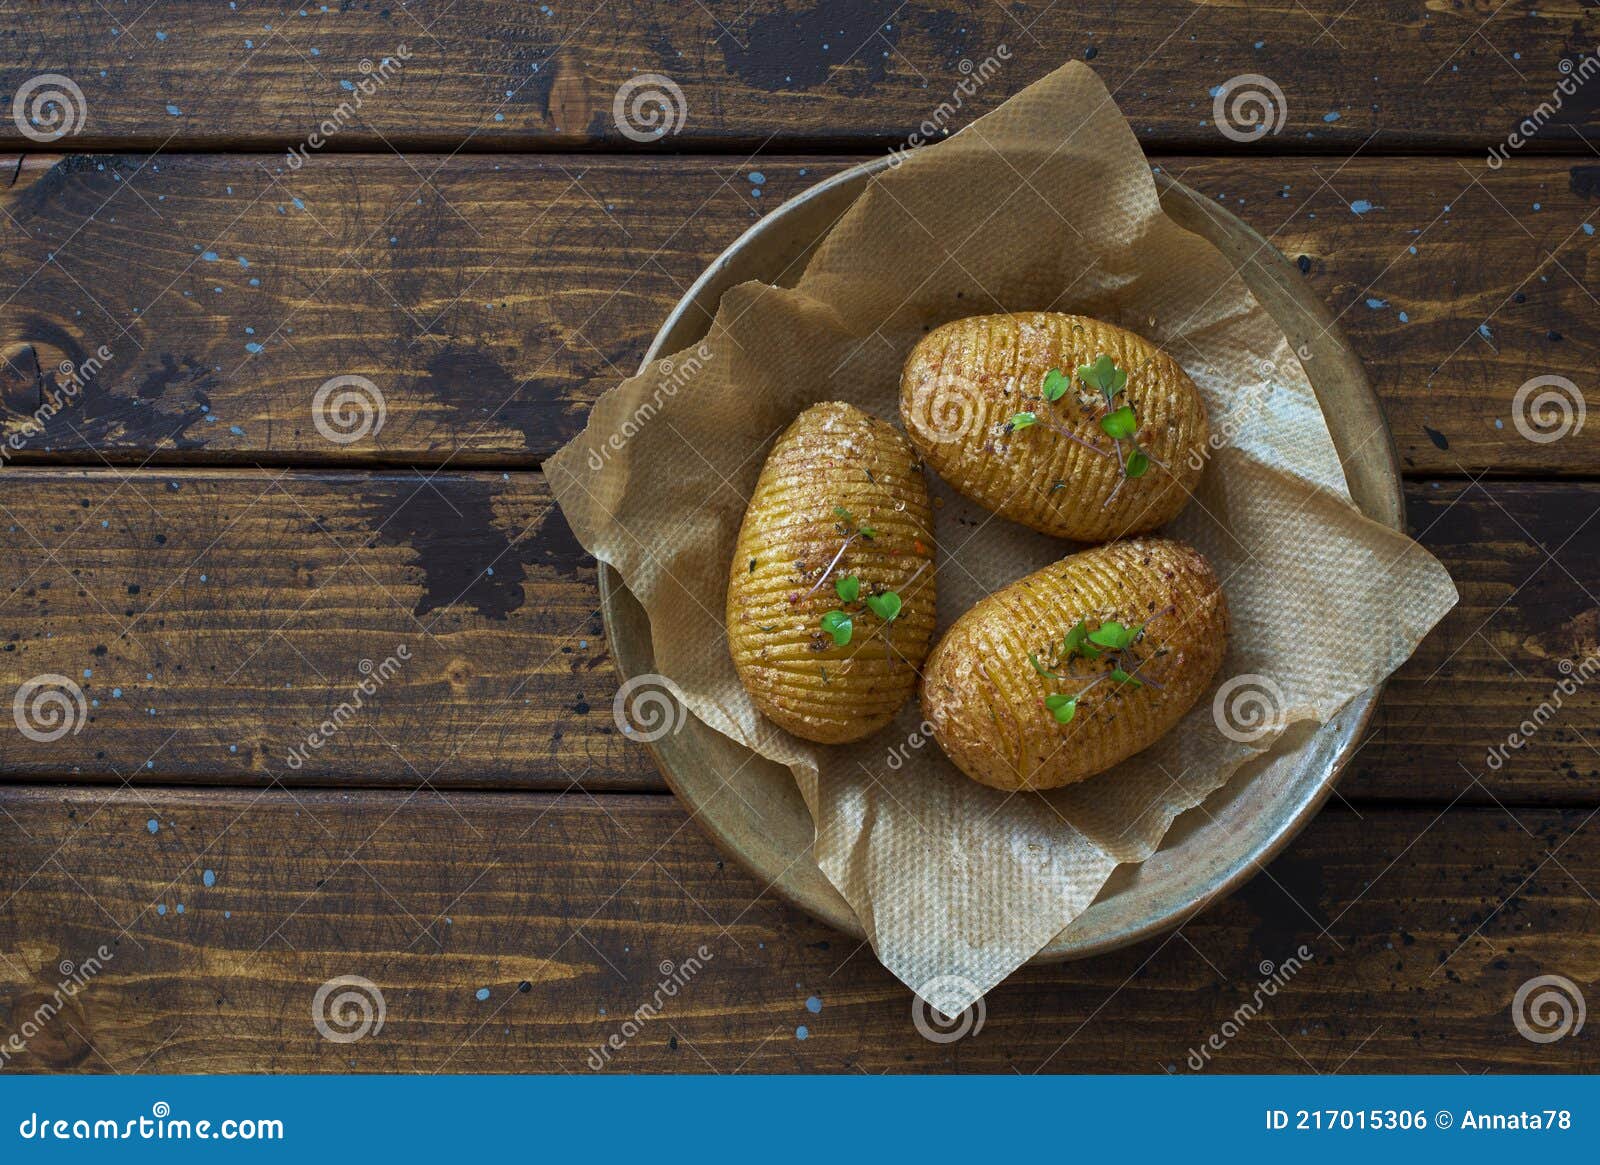 hasselblad potatoes oven  baked with spices and olive oil on dark wooden table